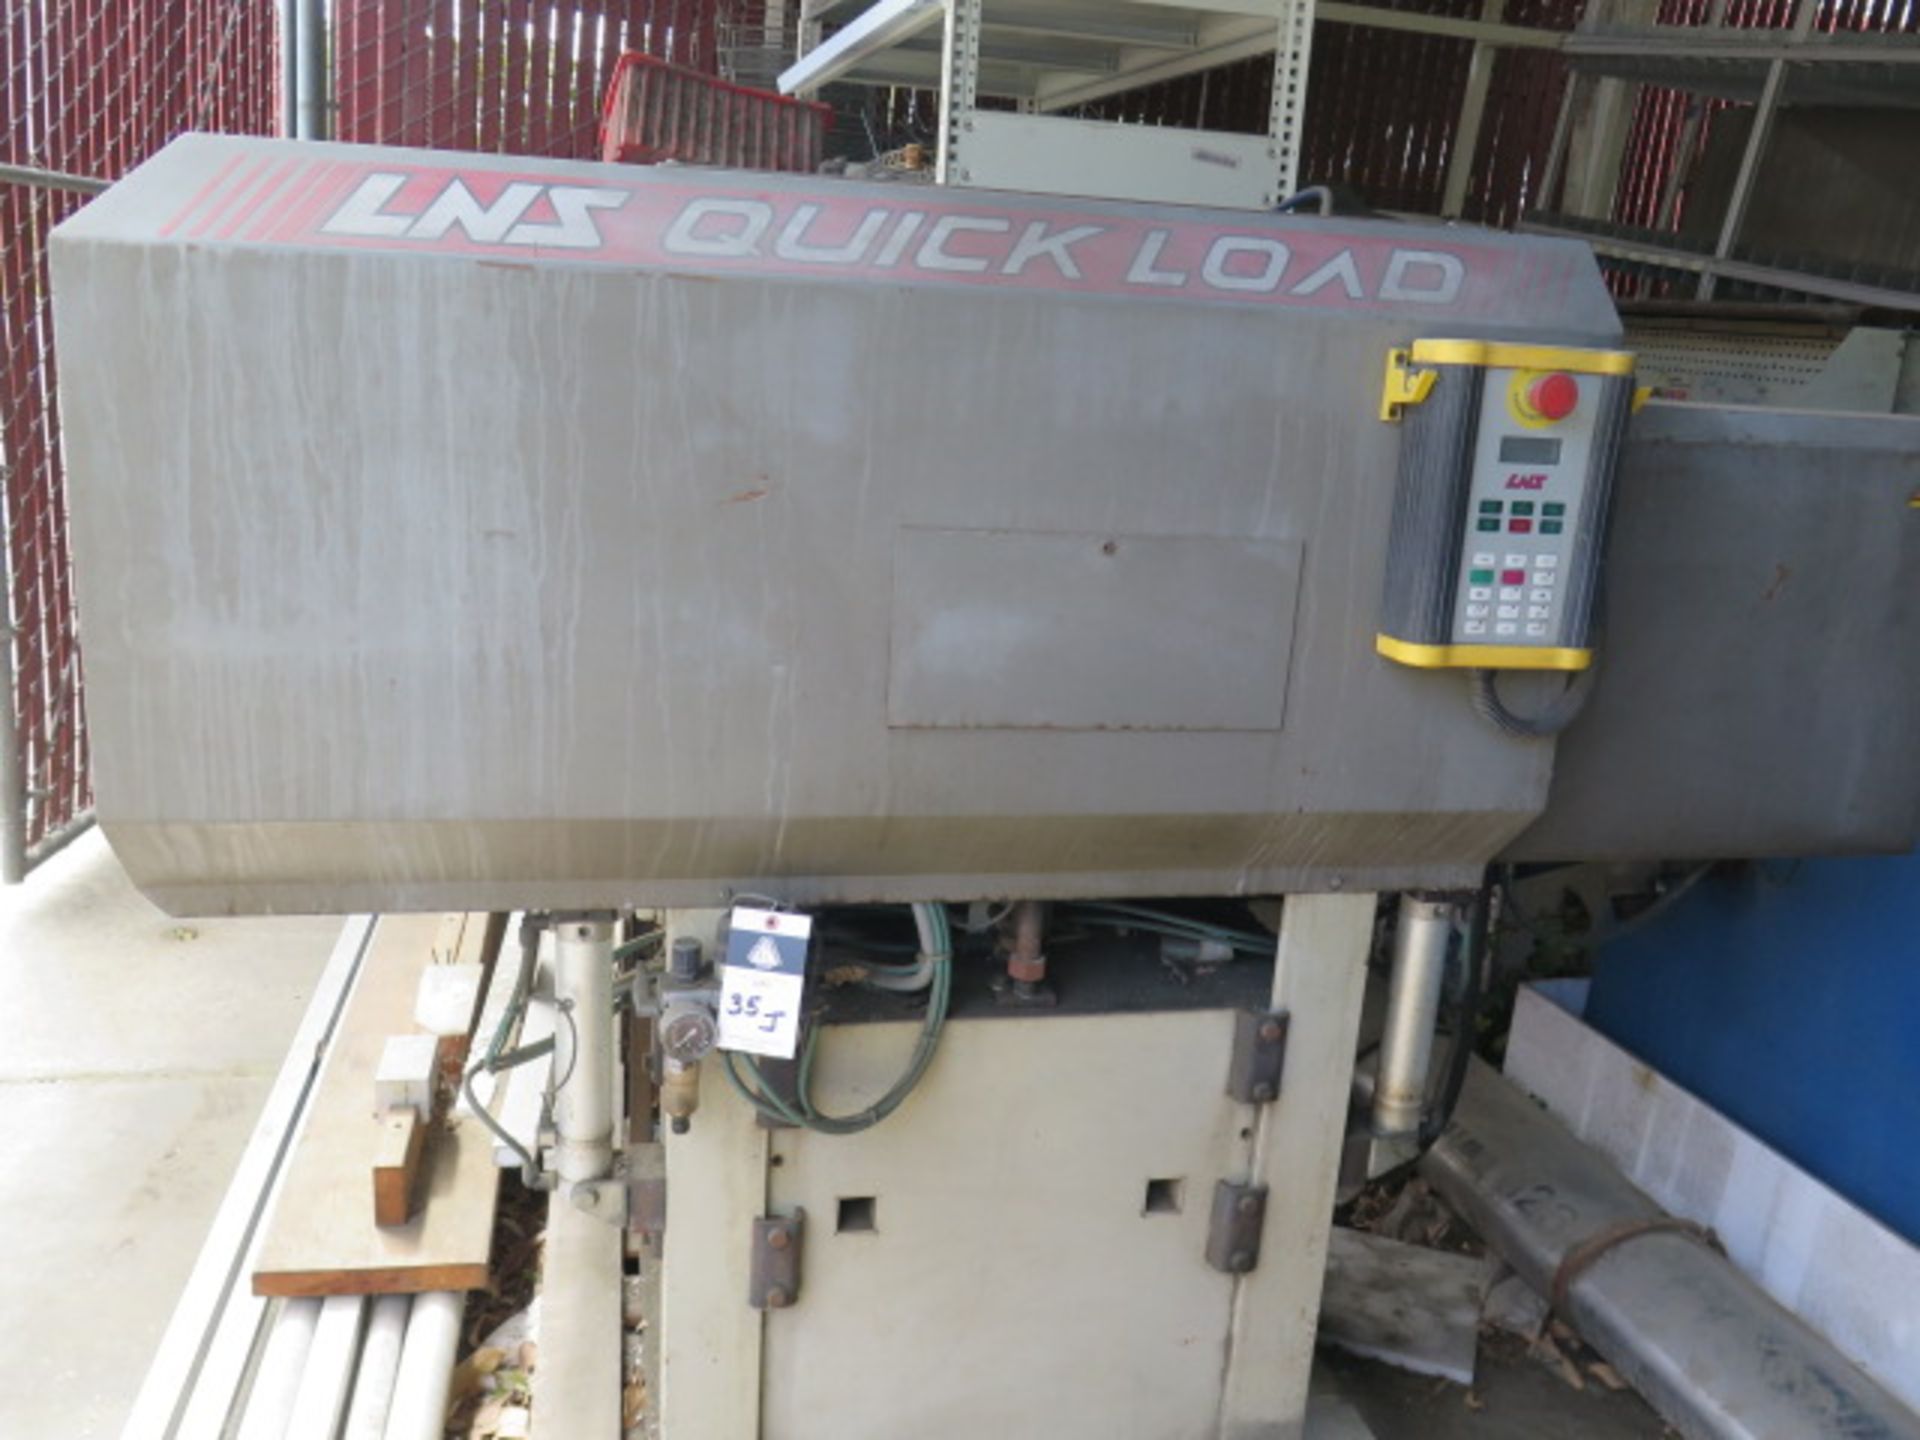 LNS Quick Load Automatic Bar Loader / Feeder (SOLD AS-IS - NO WARRANTY) (Located at 2091 Fortune Dr.